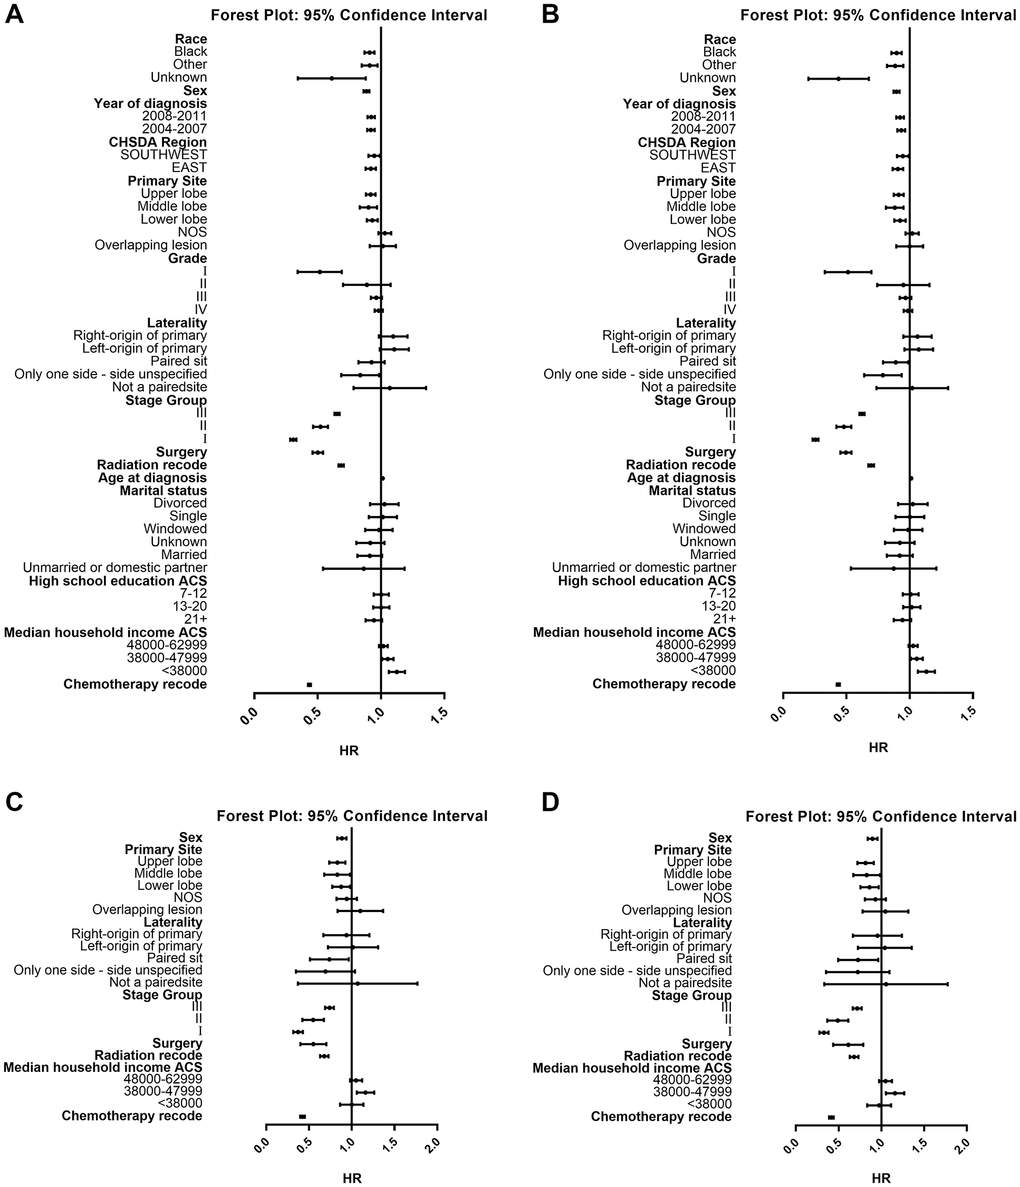 Forest plot of HRs of factors that can influence OS or LCSS in patients ≤ or >80. (A) HRs of factors influencing OS in patients ≤80 years old; (B) HRs of factors influencing LCSS in patients ≤80 years old; (C) HRs of factors influencing OS in patients >80 years old; (D) HRs of factors influencing LCSS in patients >80 years old. Abbreviations: HRs: Hazard ratios; OS: Overall survival; LCSS: Lung cancer-specific survival.